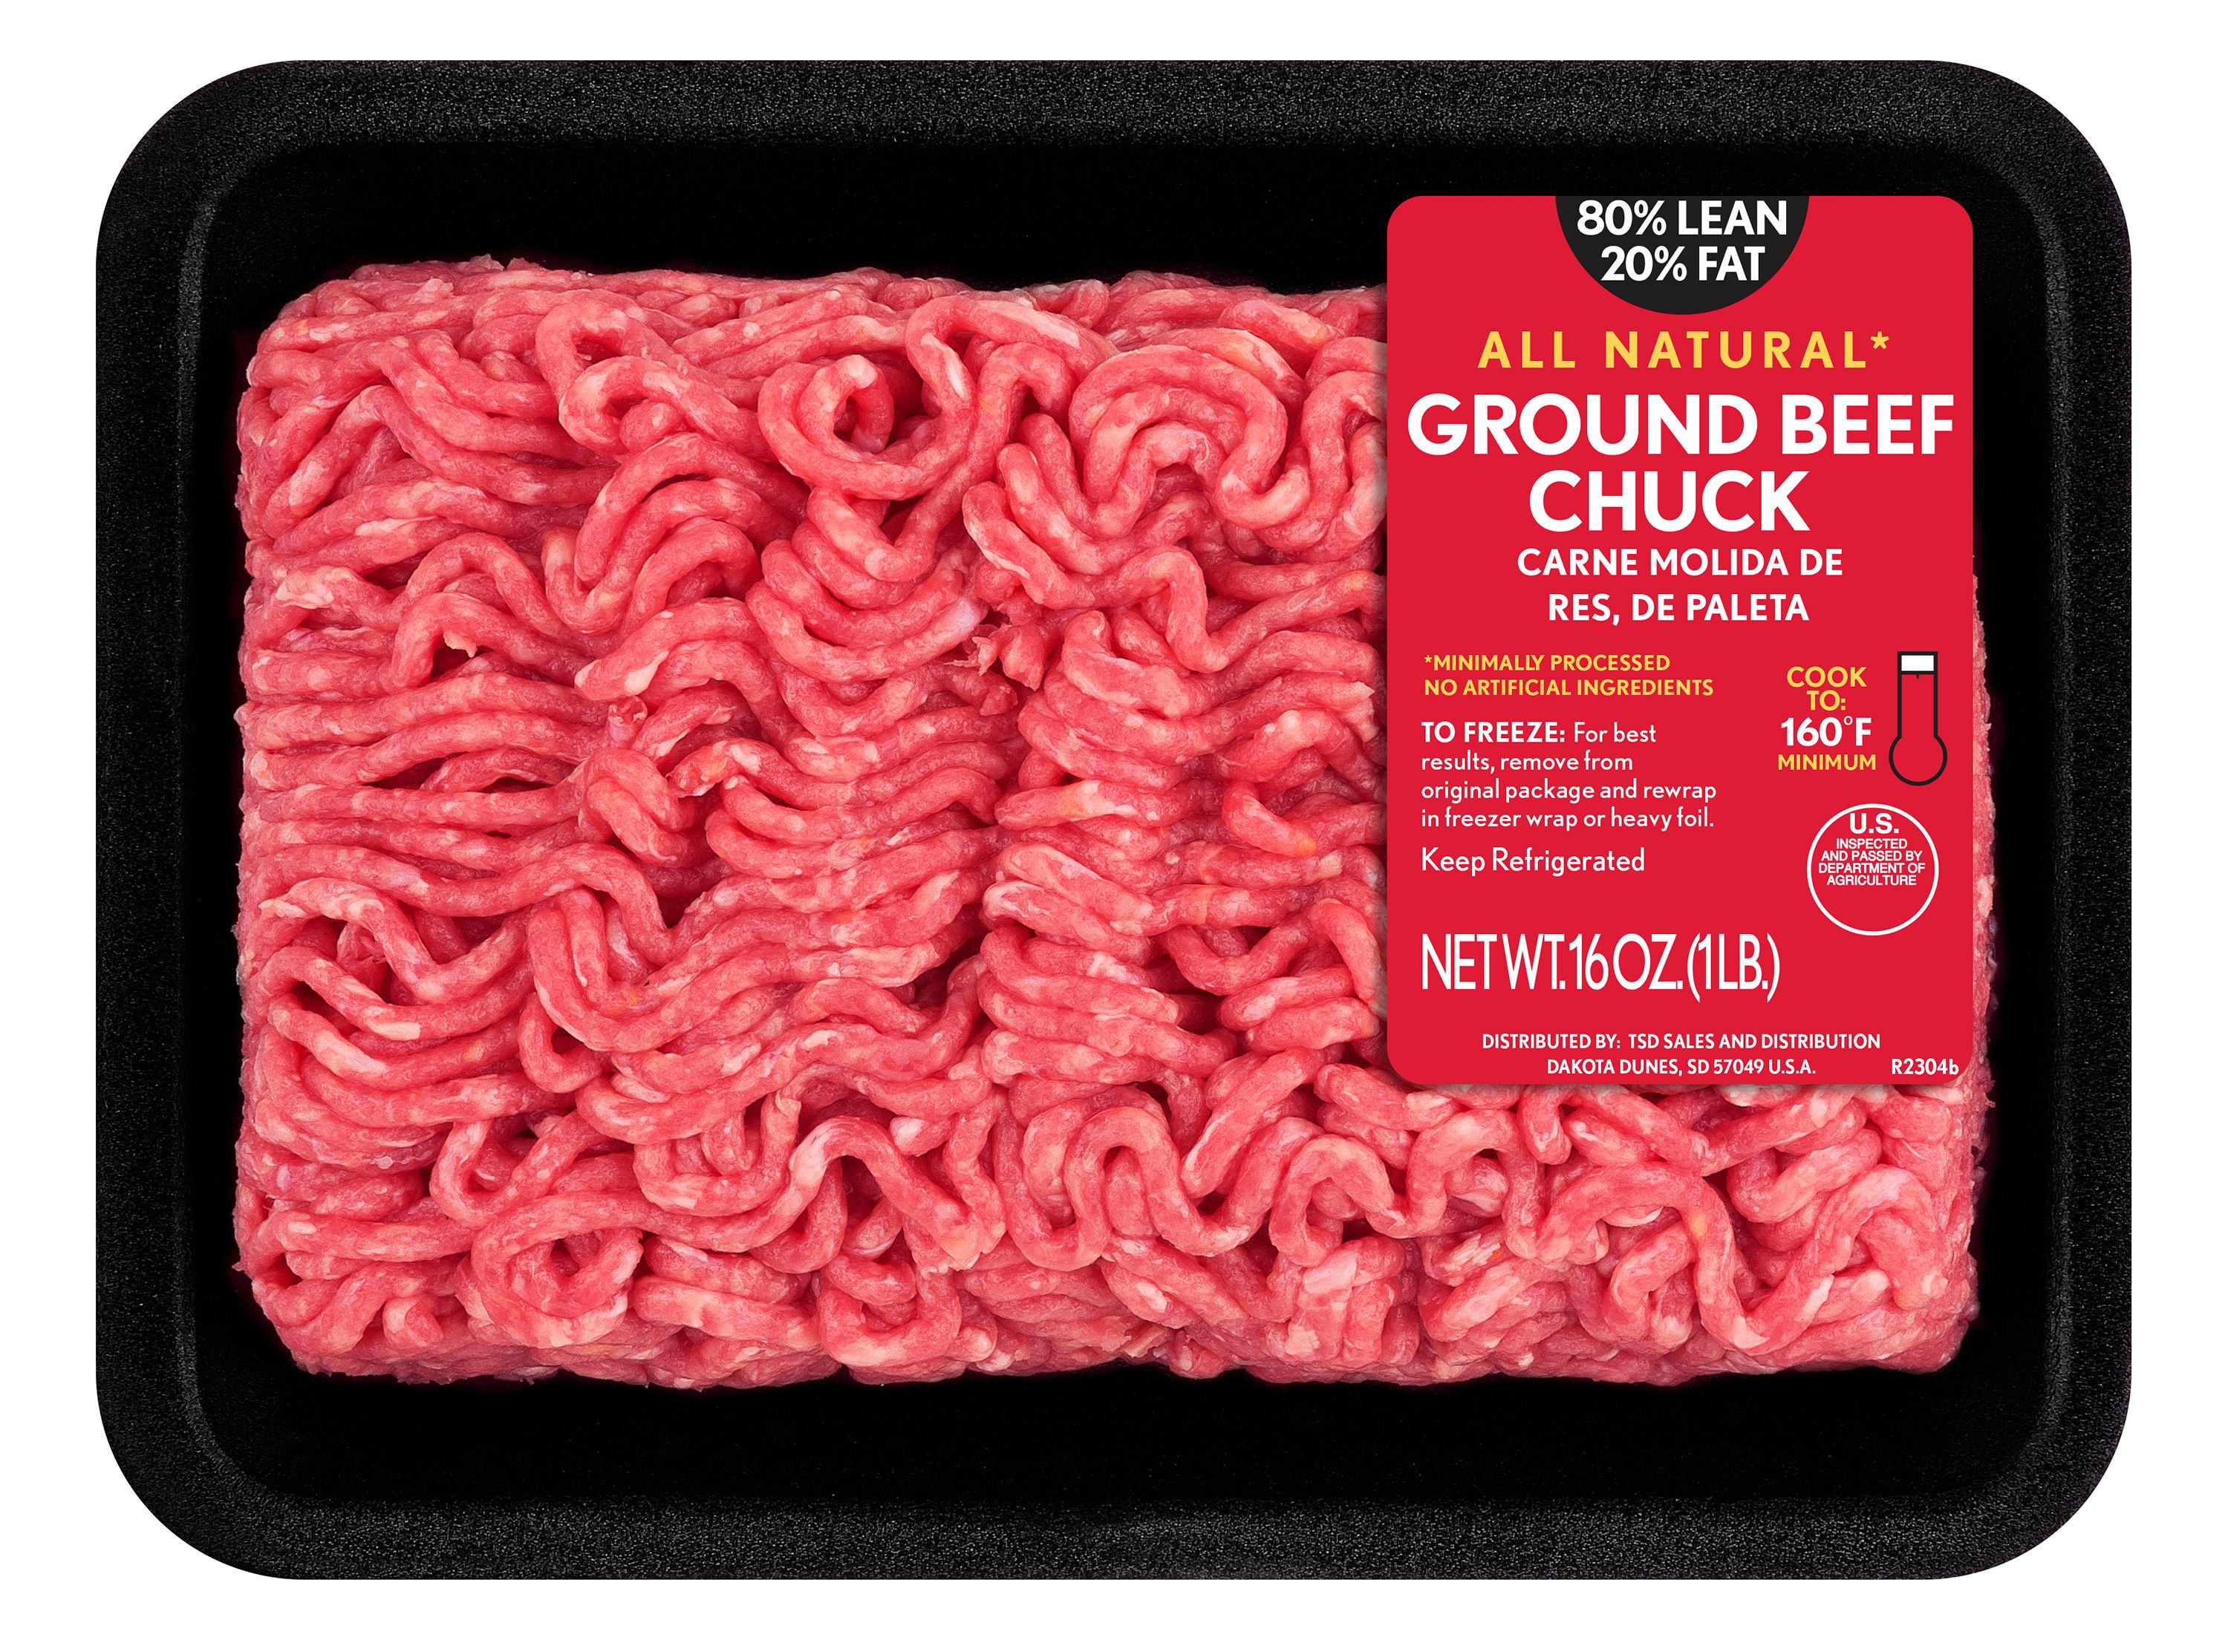 All Natural* 96% Extra Lean Ground Beef Tray, 1 lb Walmart.com